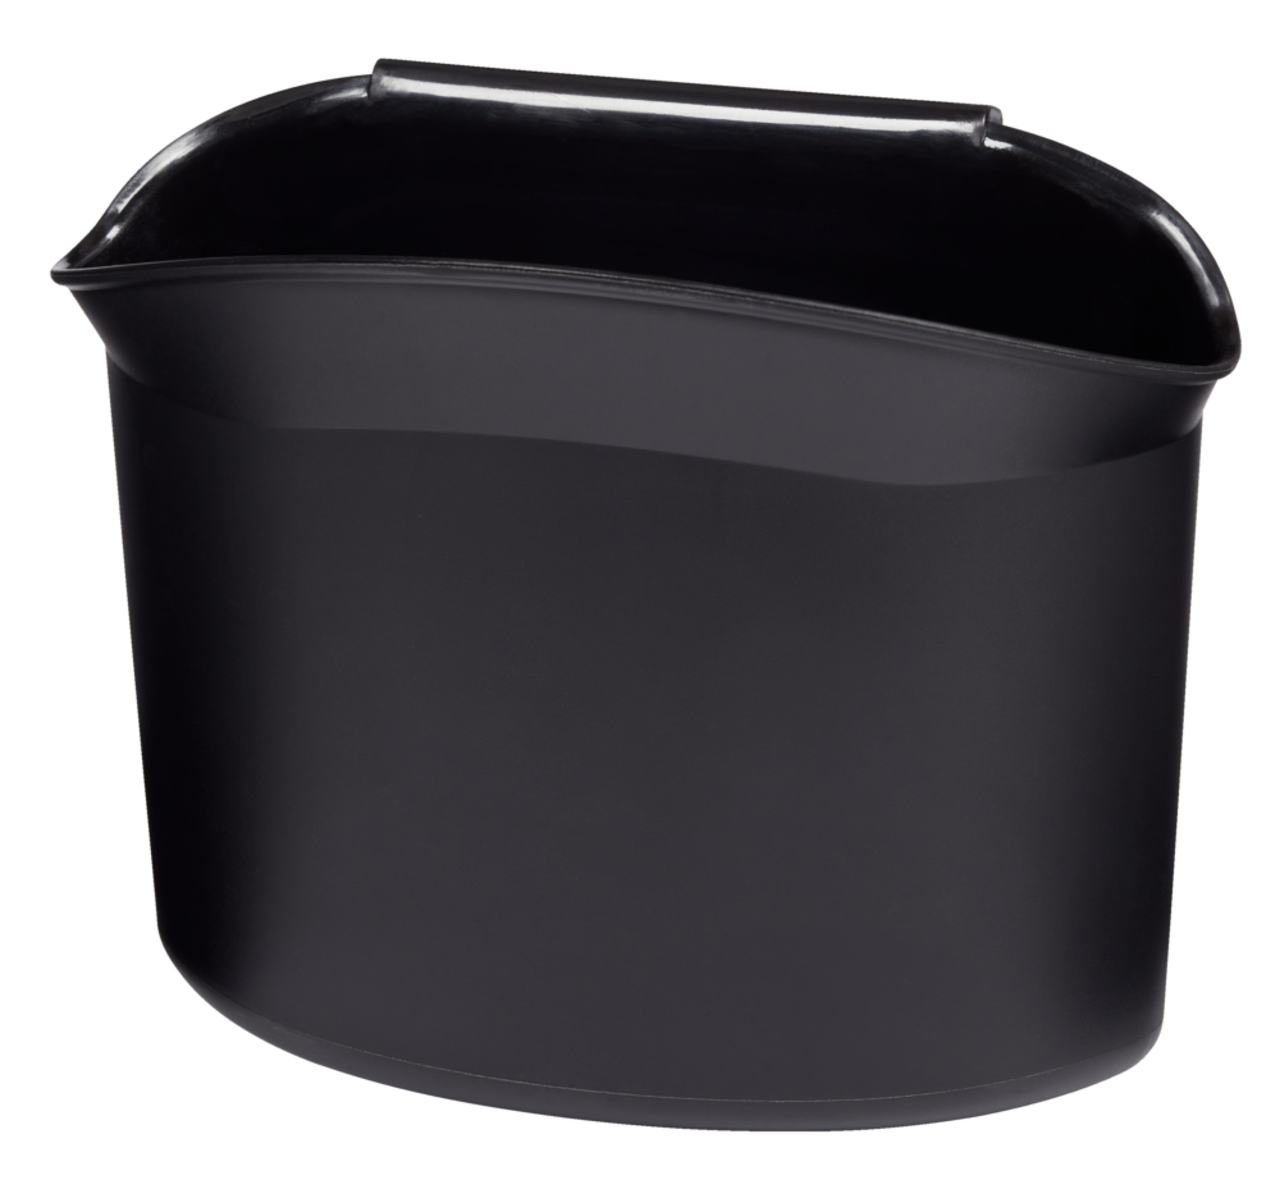 https://media-www.canadiantire.ca/product/automotive/car-care-accessories/auto-accessories/0373293/autotrends-portable-auto-trash-can-724b3e35-45f2-43db-b3ef-2424c889d36a.png?imdensity=1&imwidth=640&impolicy=mZoom